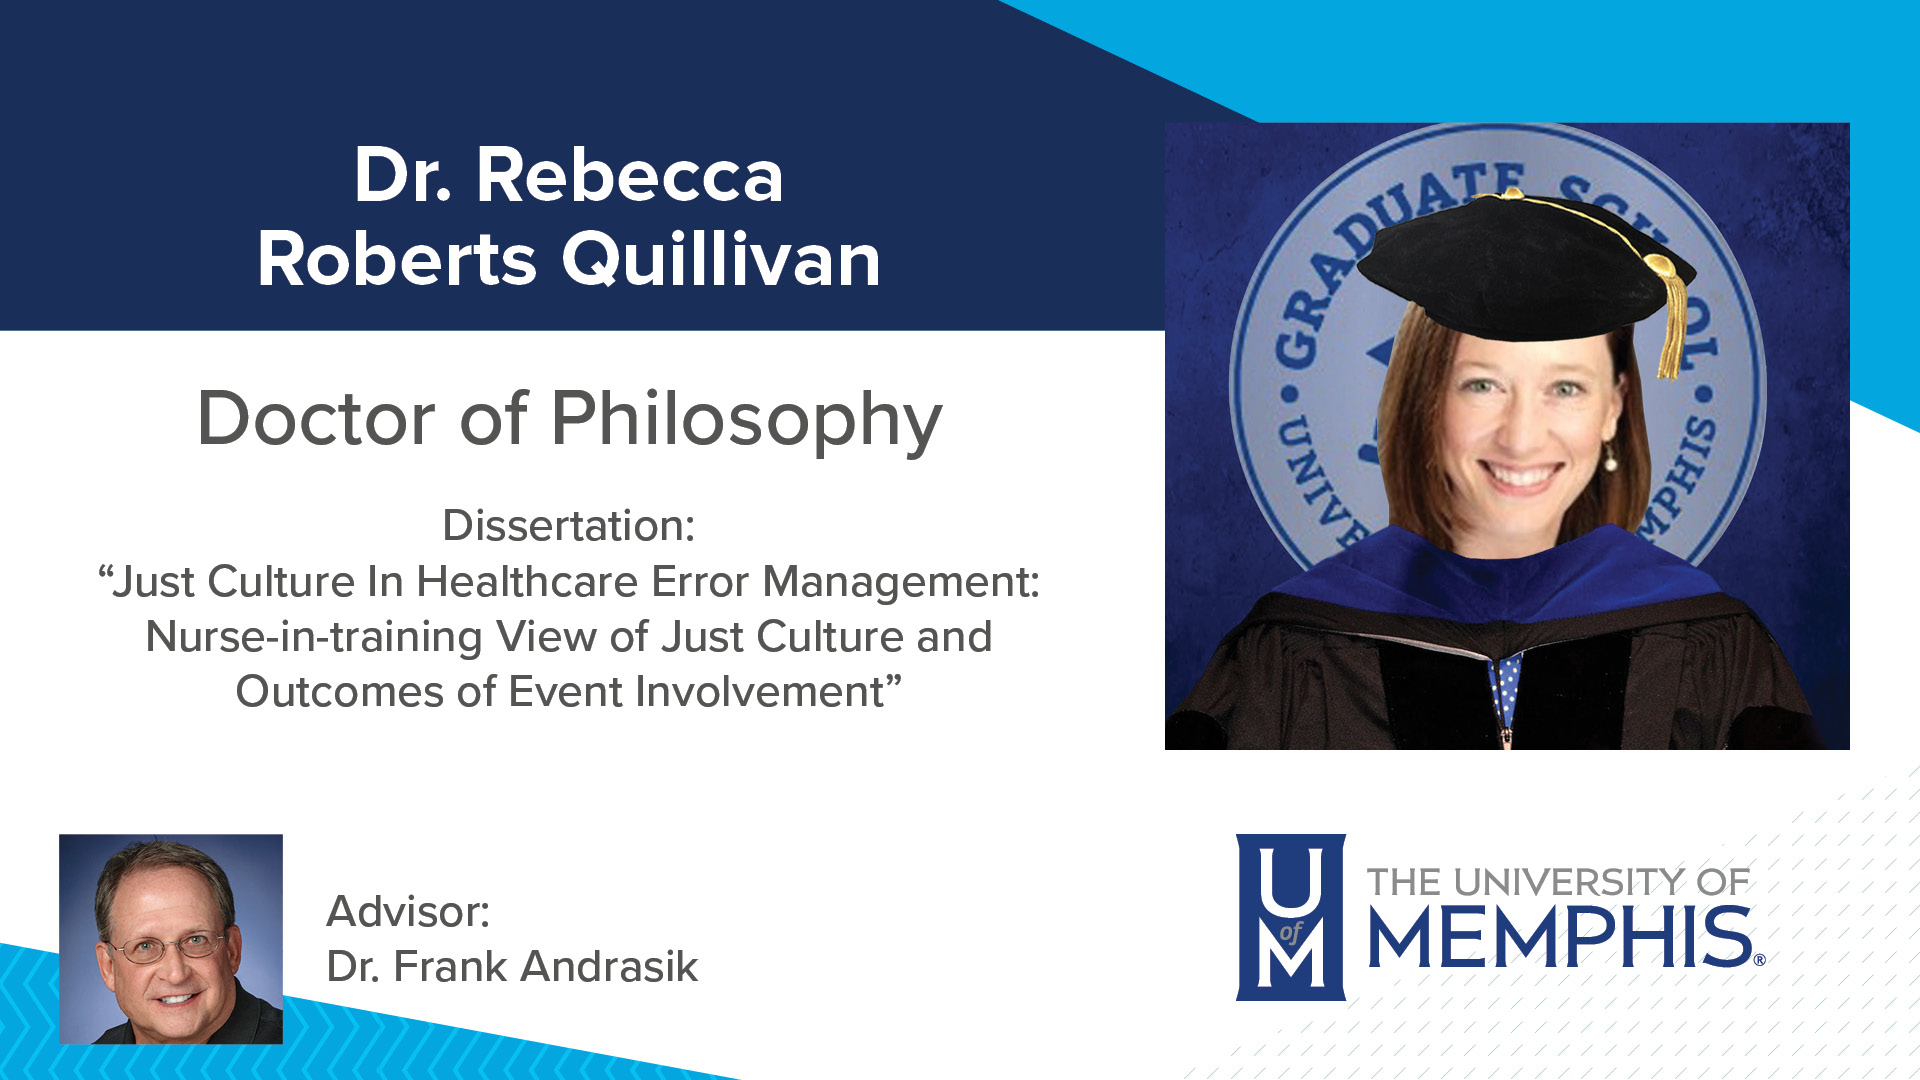 Dr. Rebecca Roberts Quillivan Dissertation: “Just Culture In Healthcare Error Management: Nurse-in-training View of Just Culture and Outcomes of Event Involvement ” Major Professor: Dr. Frank Andrasik